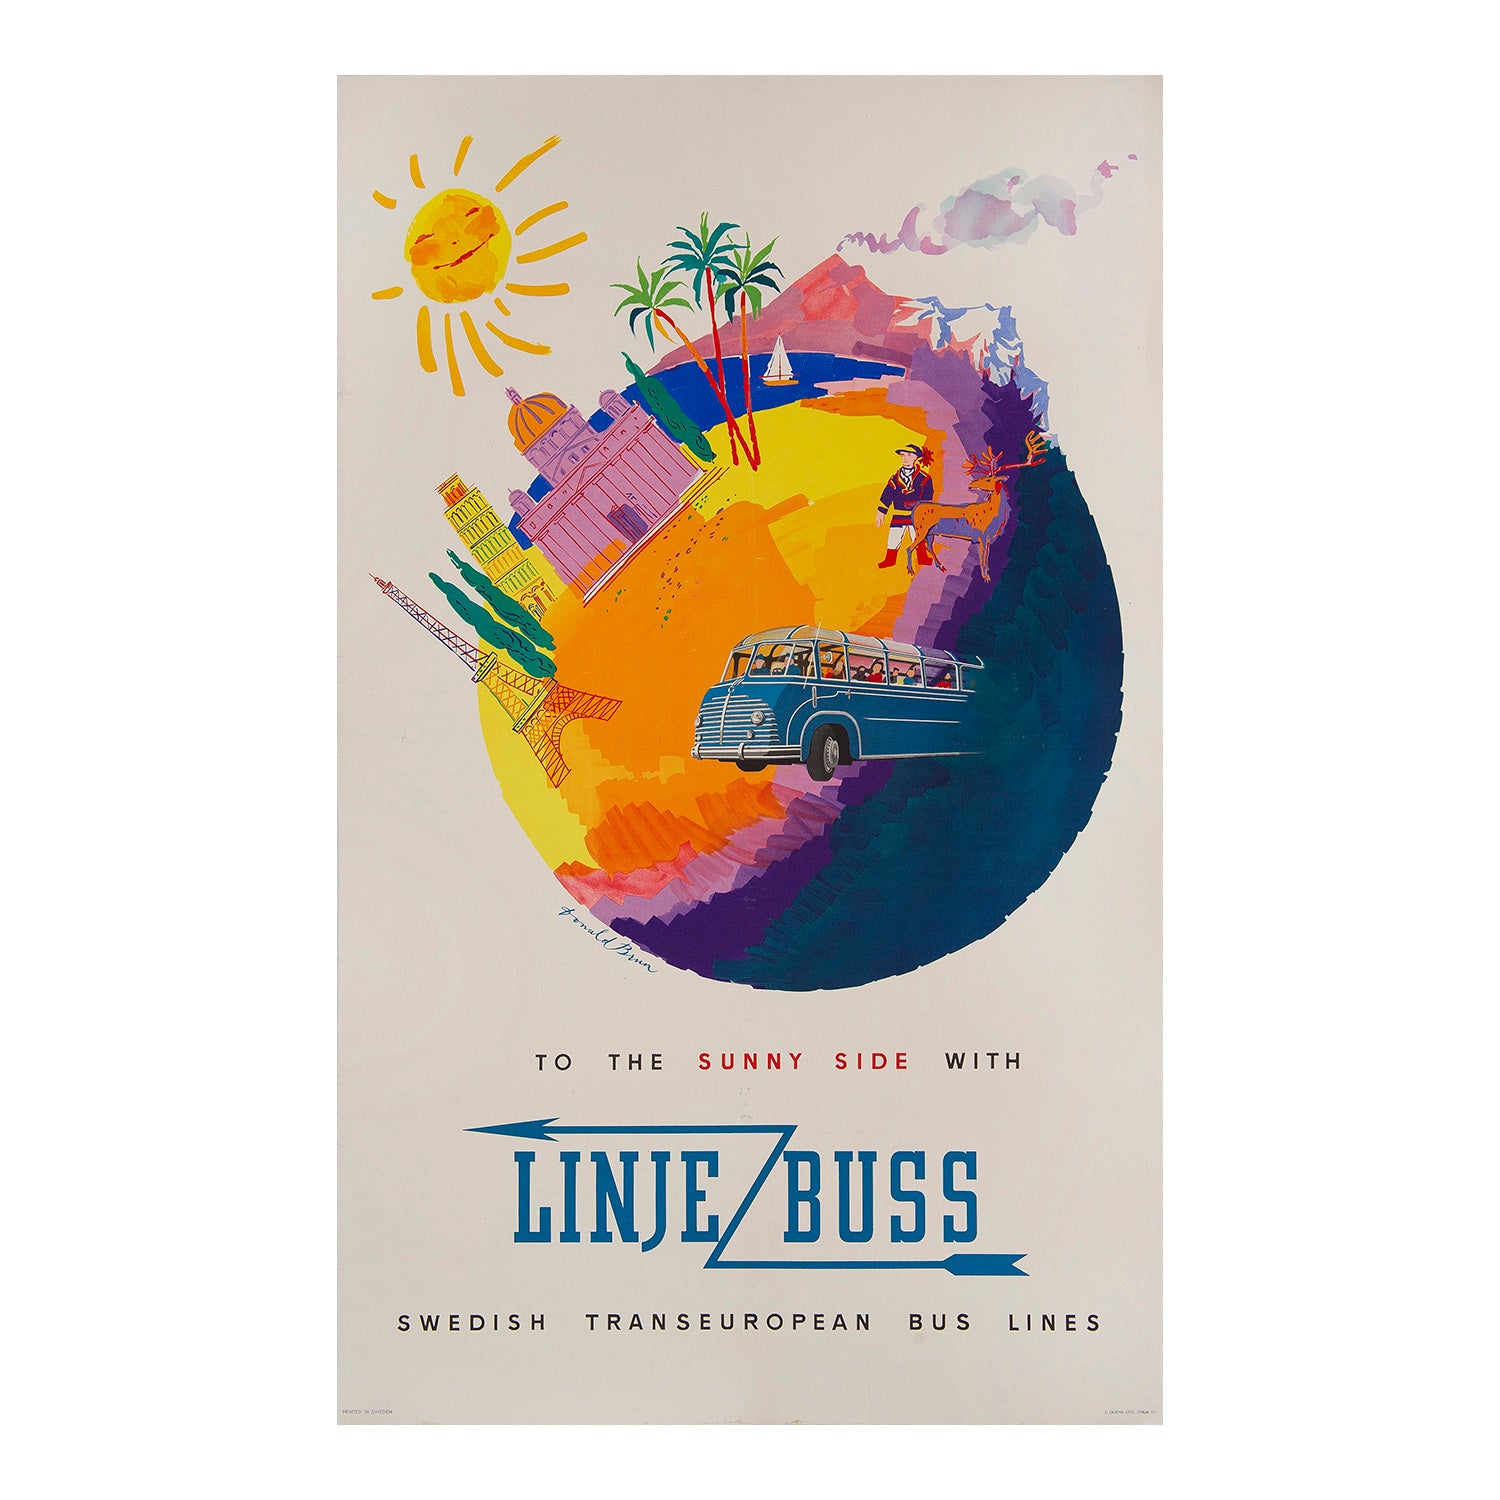 An original poster designed by Donald Brun for Linjebuss (Swedish Trans European Bus Lines), 1954. The design features a global motif with the mountains of Sweden connected with ‘the sunny side’ of Europe via one of the company’s distinctive blue coaches. 